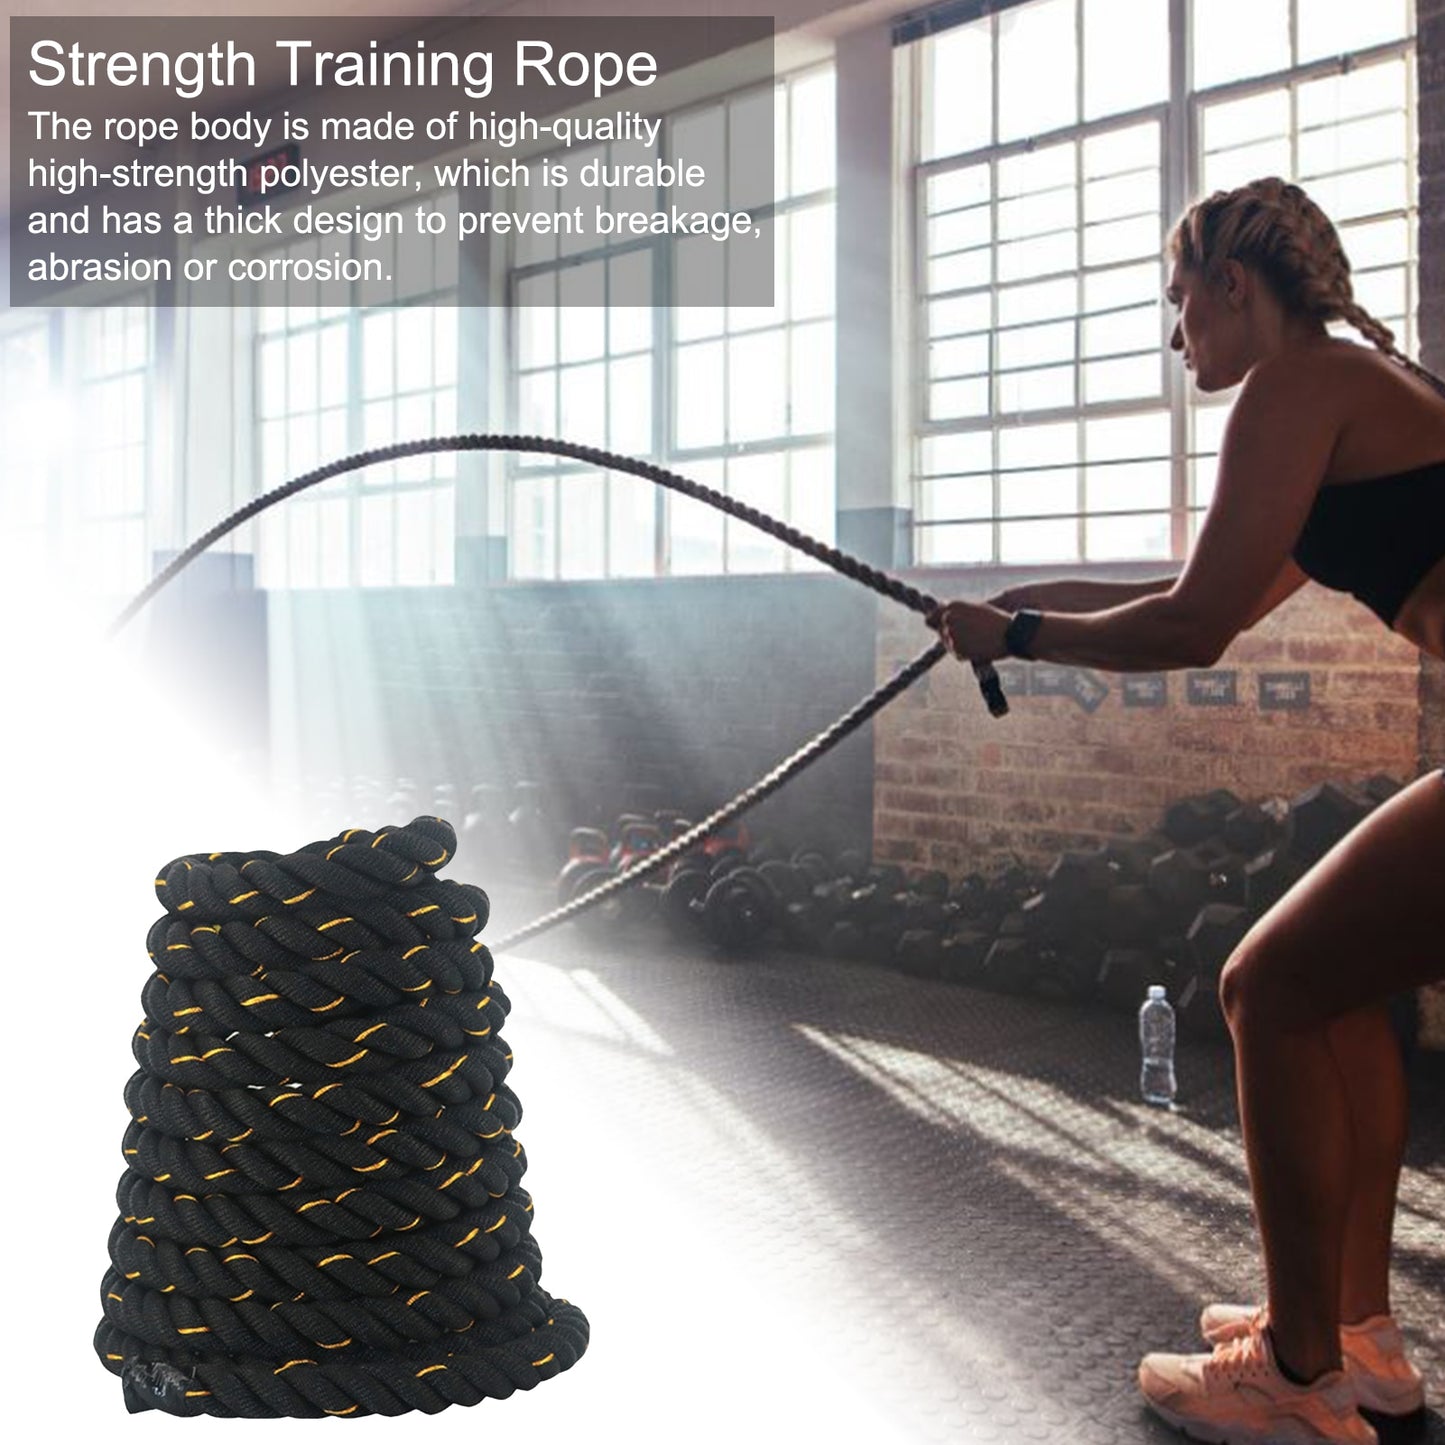 Strength Training Rope for fitness